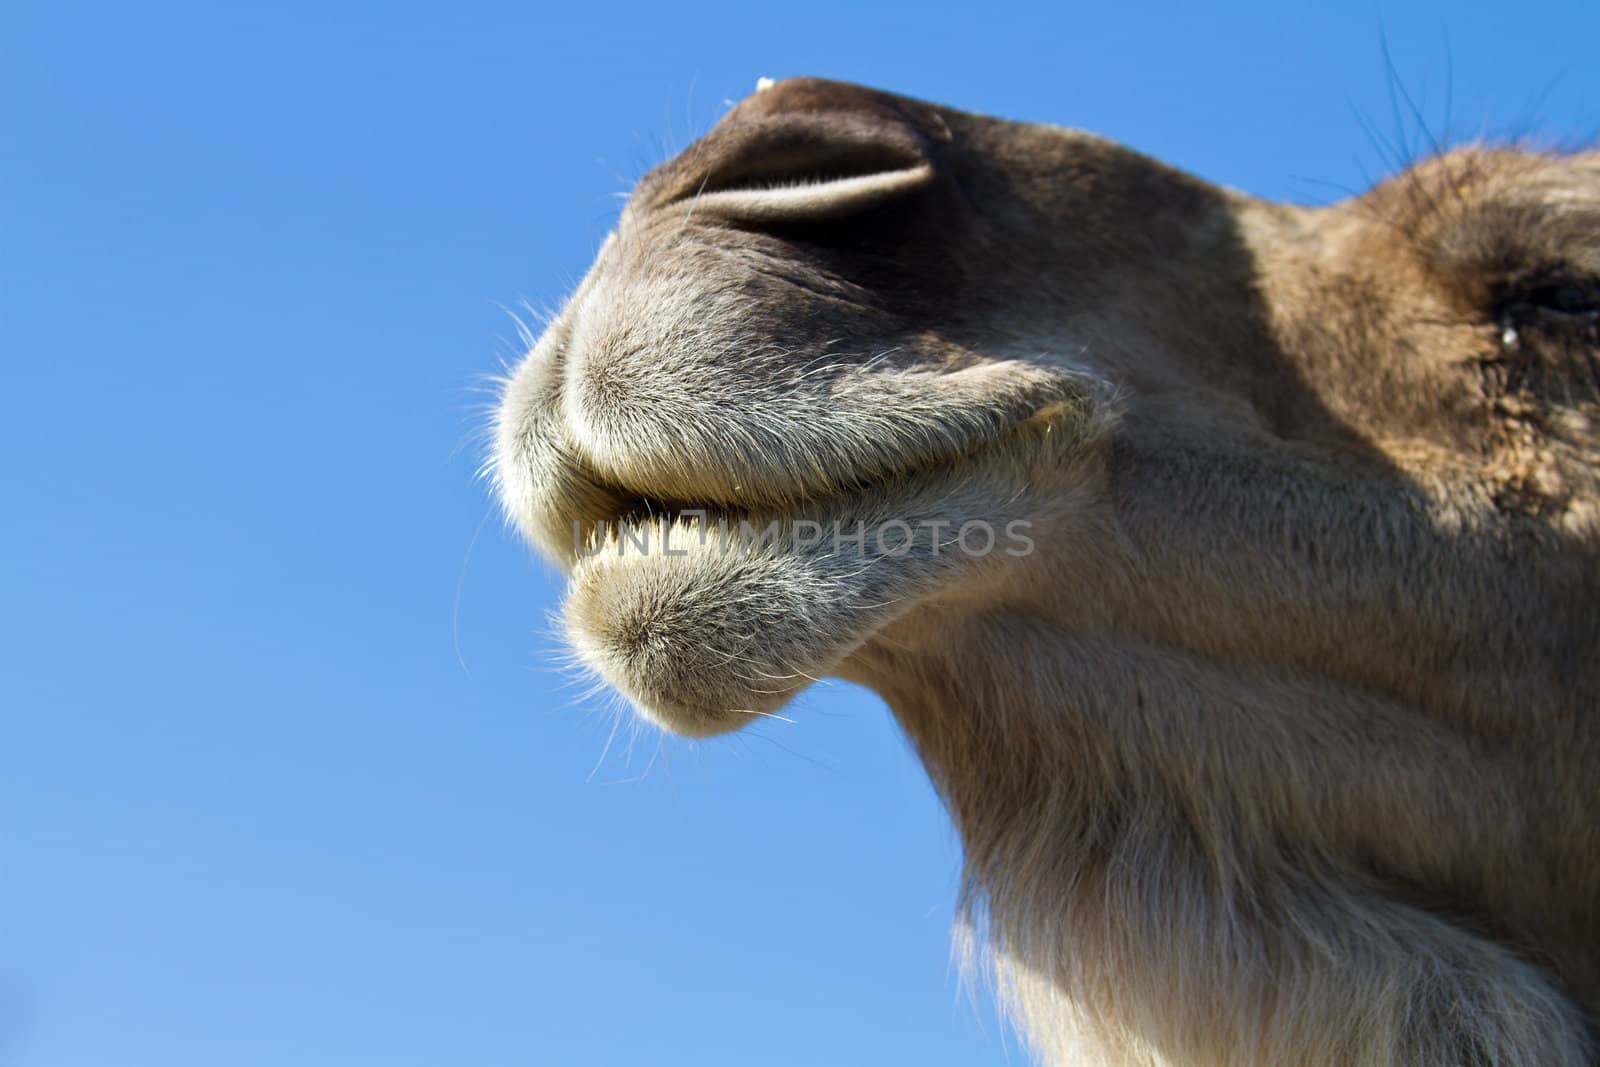 a portrait of the face of dromedary